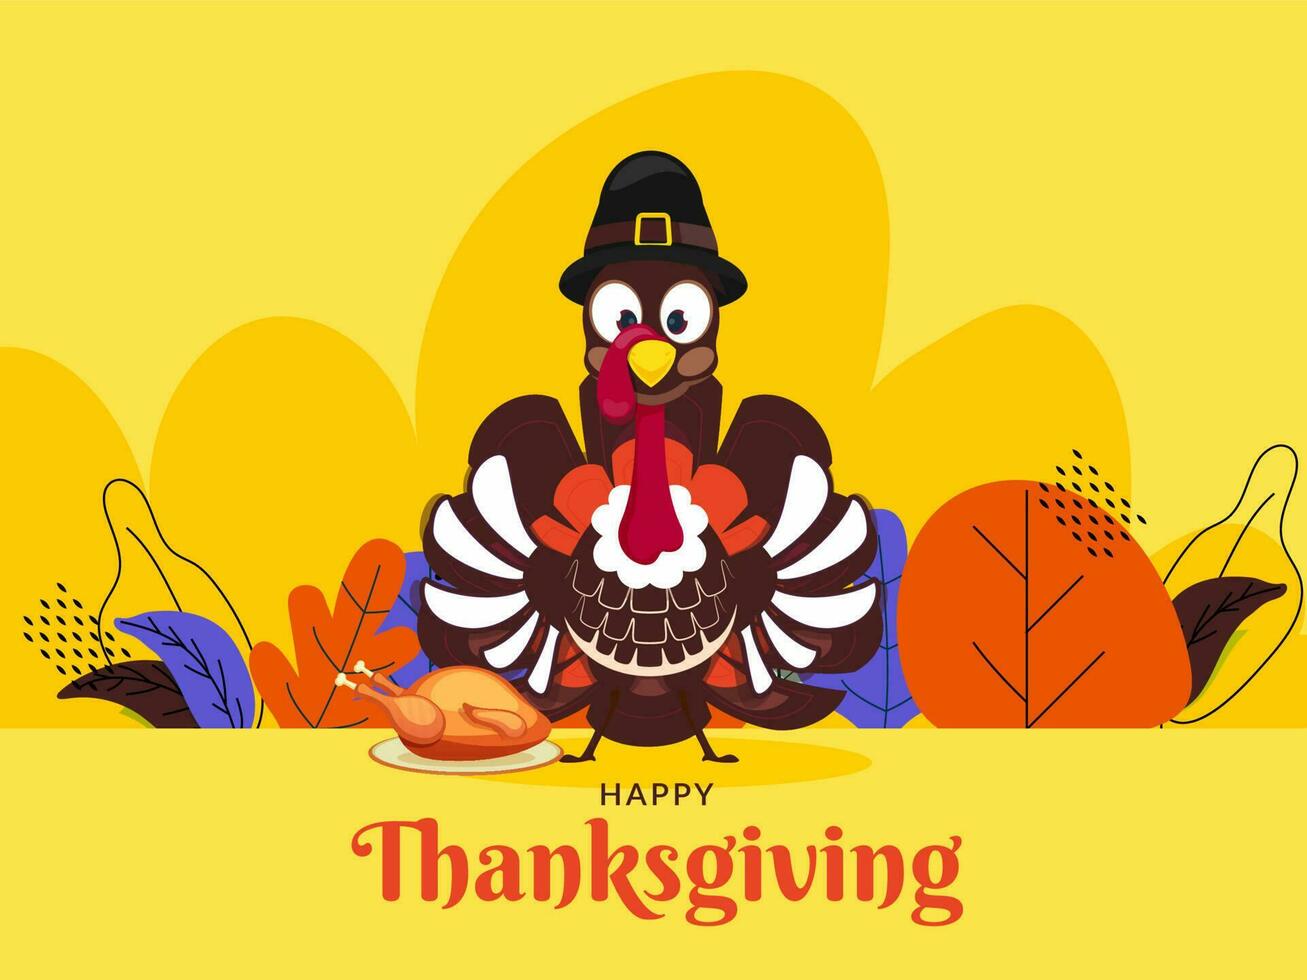 Happy Thanksgiving greeting card design with illustration of turkey bird wearing pilgrim hat and autumn leaves decorated on yellow background. vector